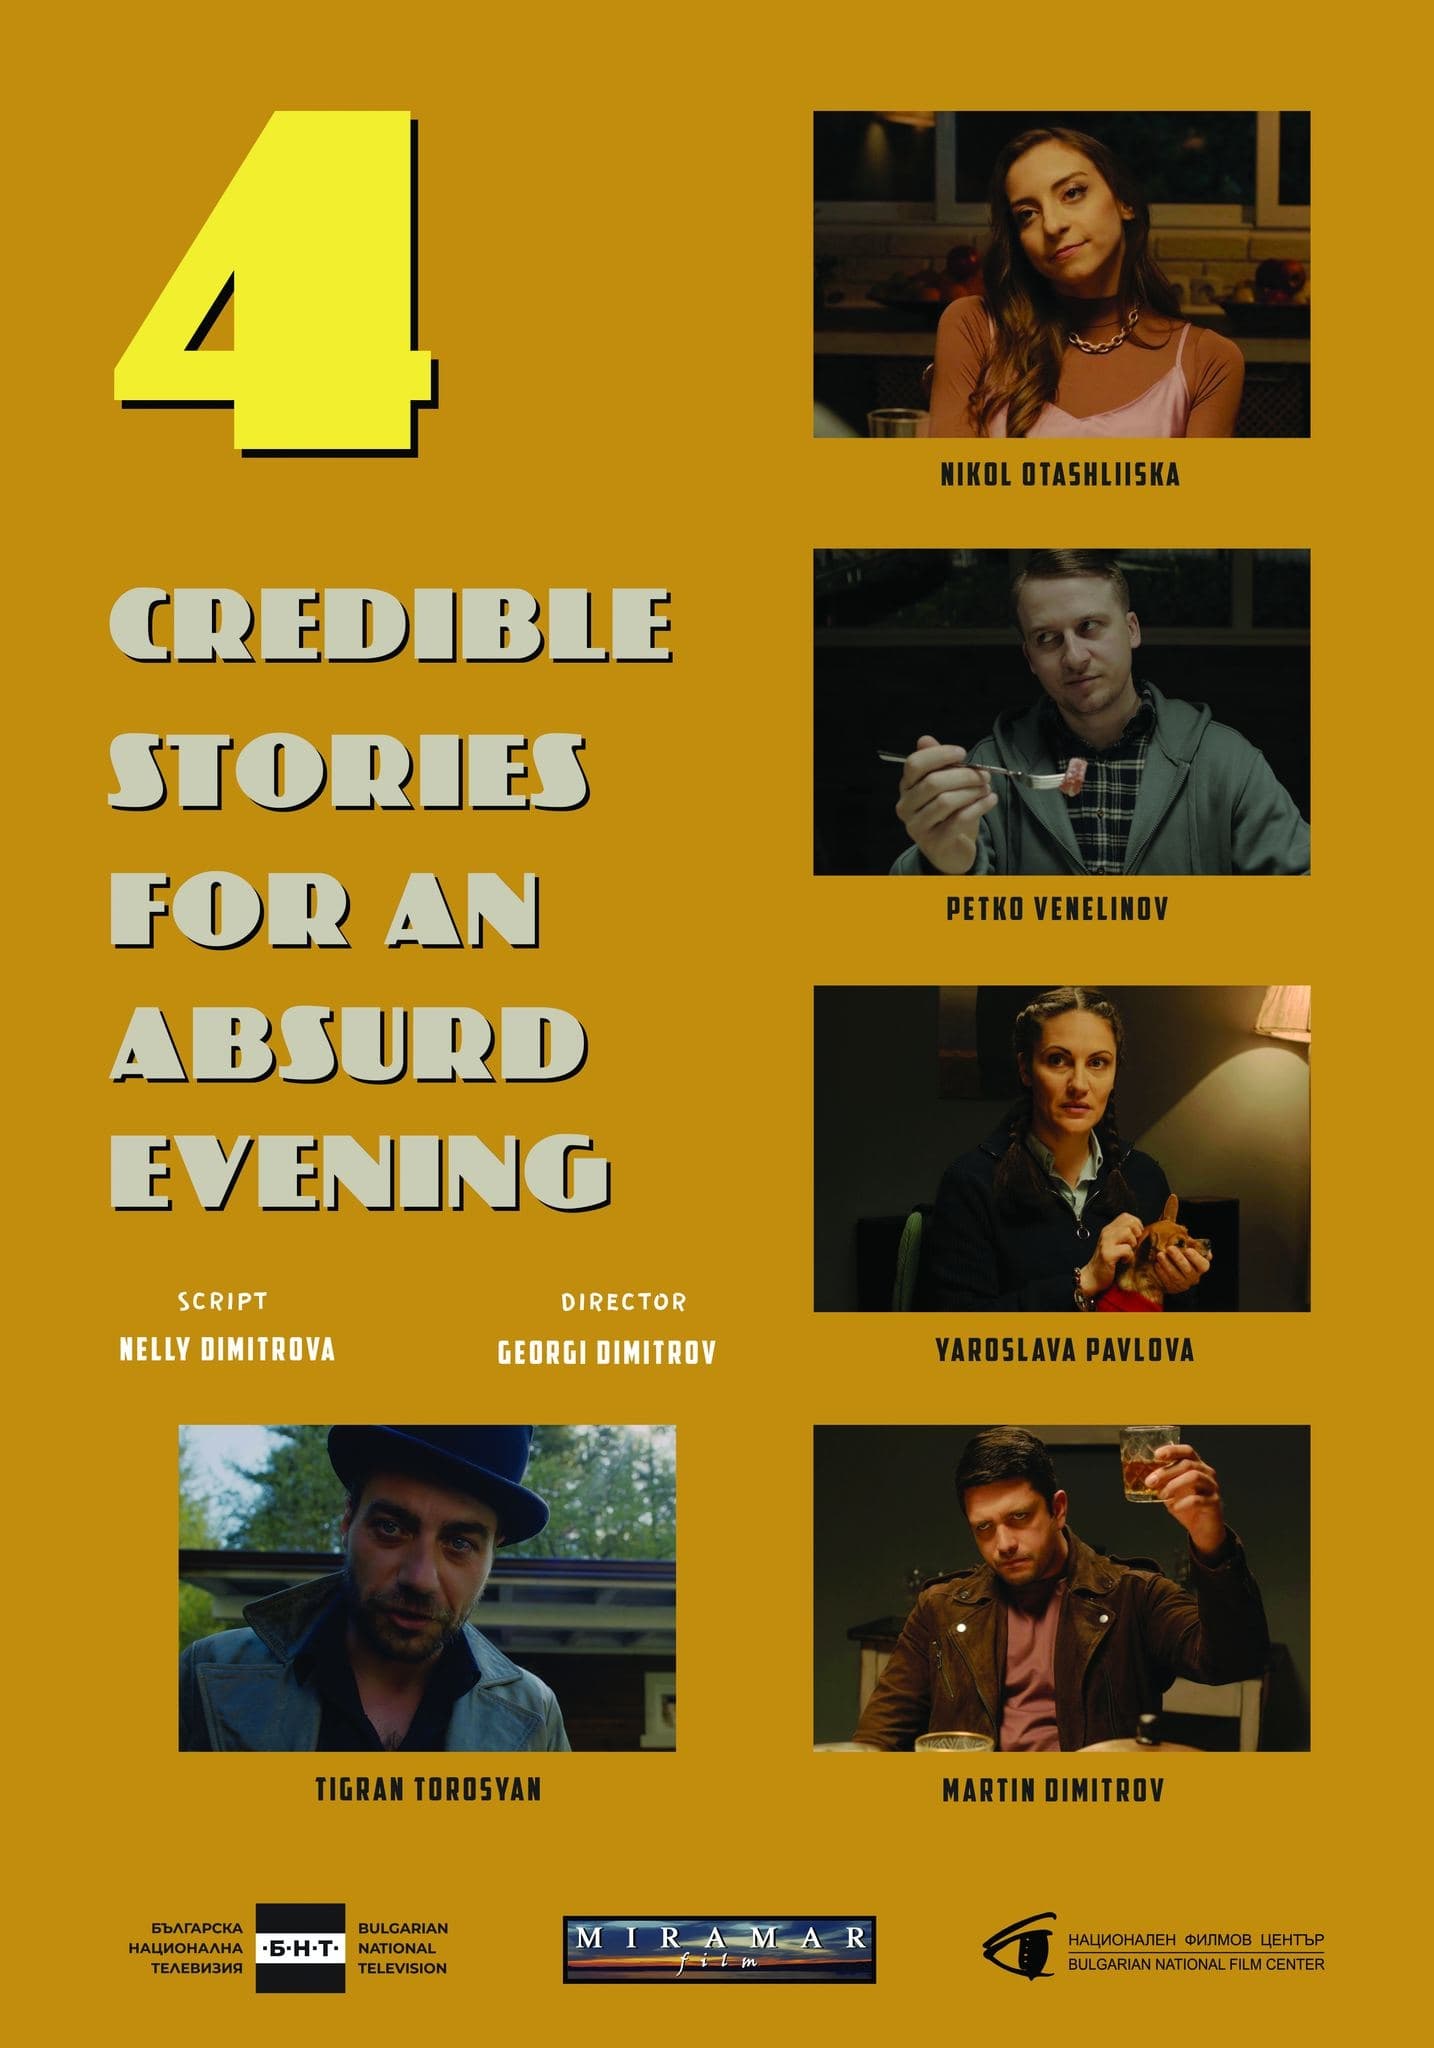 Four Credible Stories for an Absurd Evening